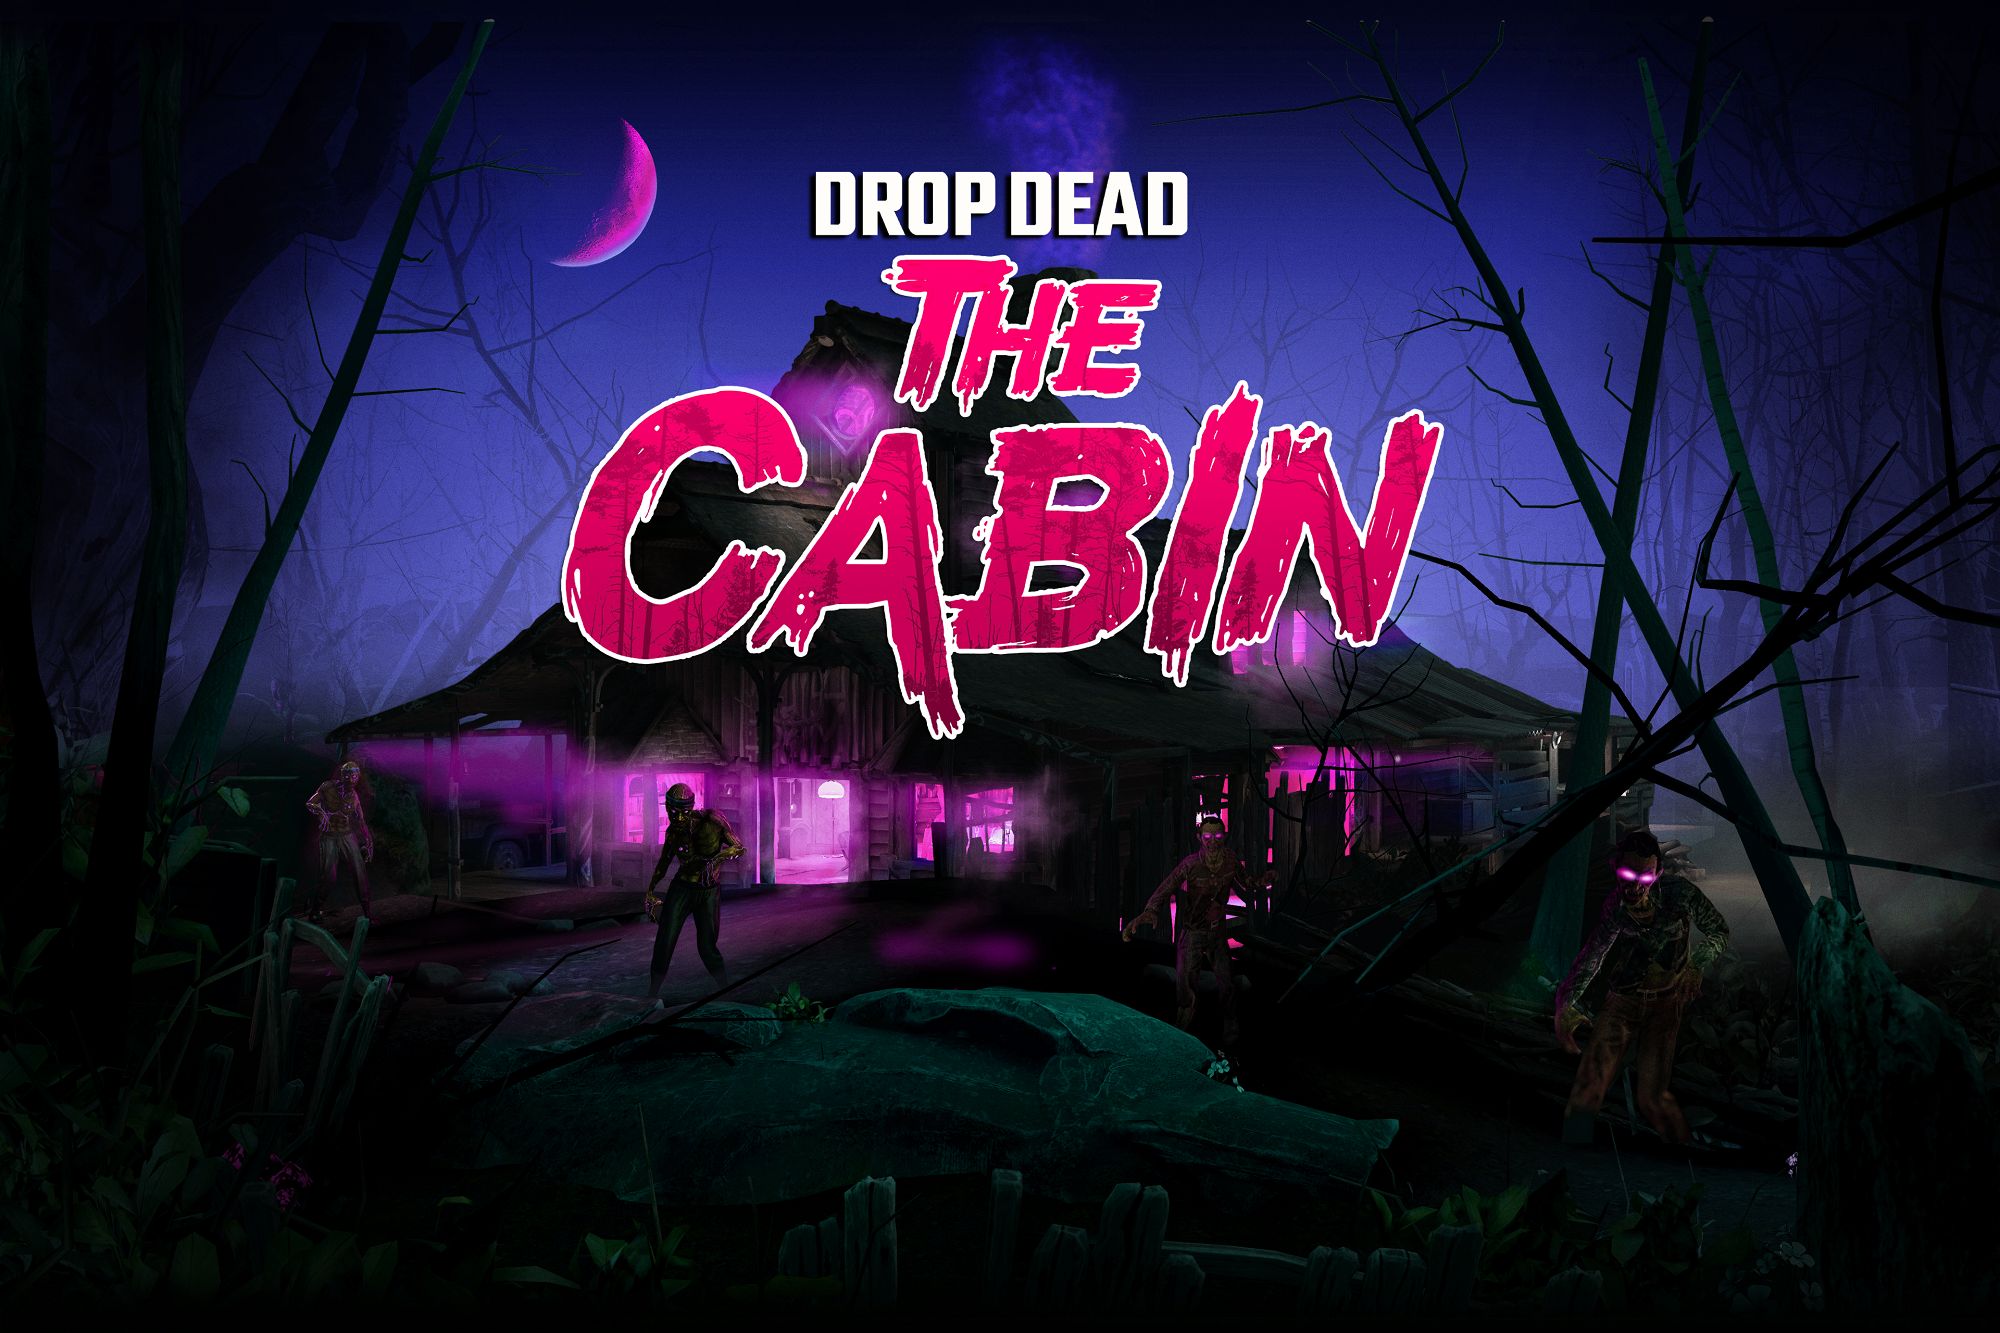 drop-dead-the-cabin-vr-news-rumors-and-information-bleeding-cool-news-page-1